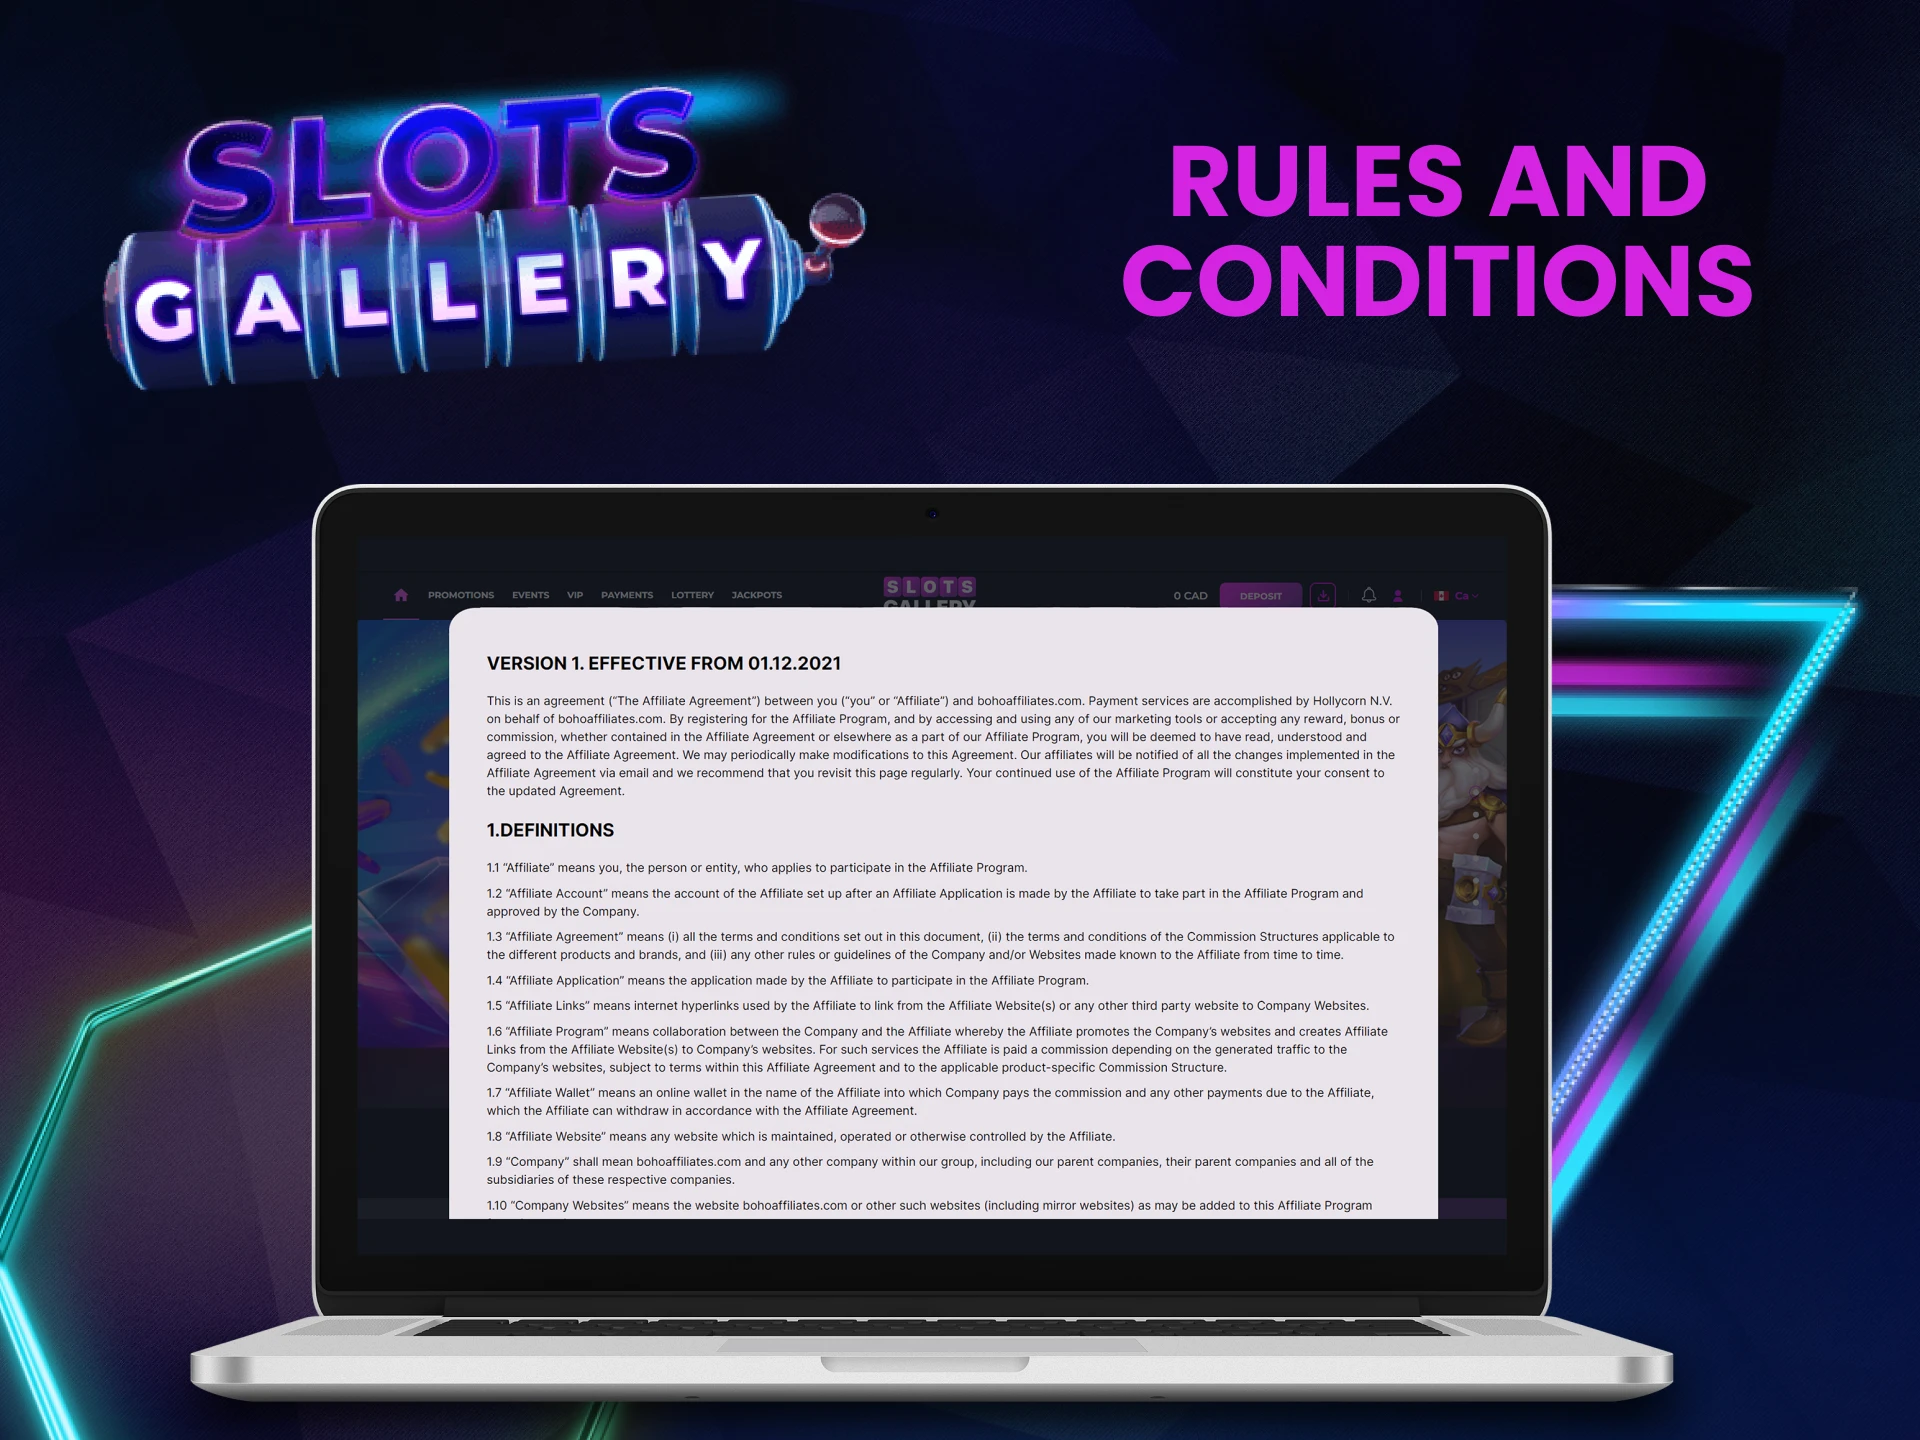 Read the rules of the Slots Gallery affiliate program.